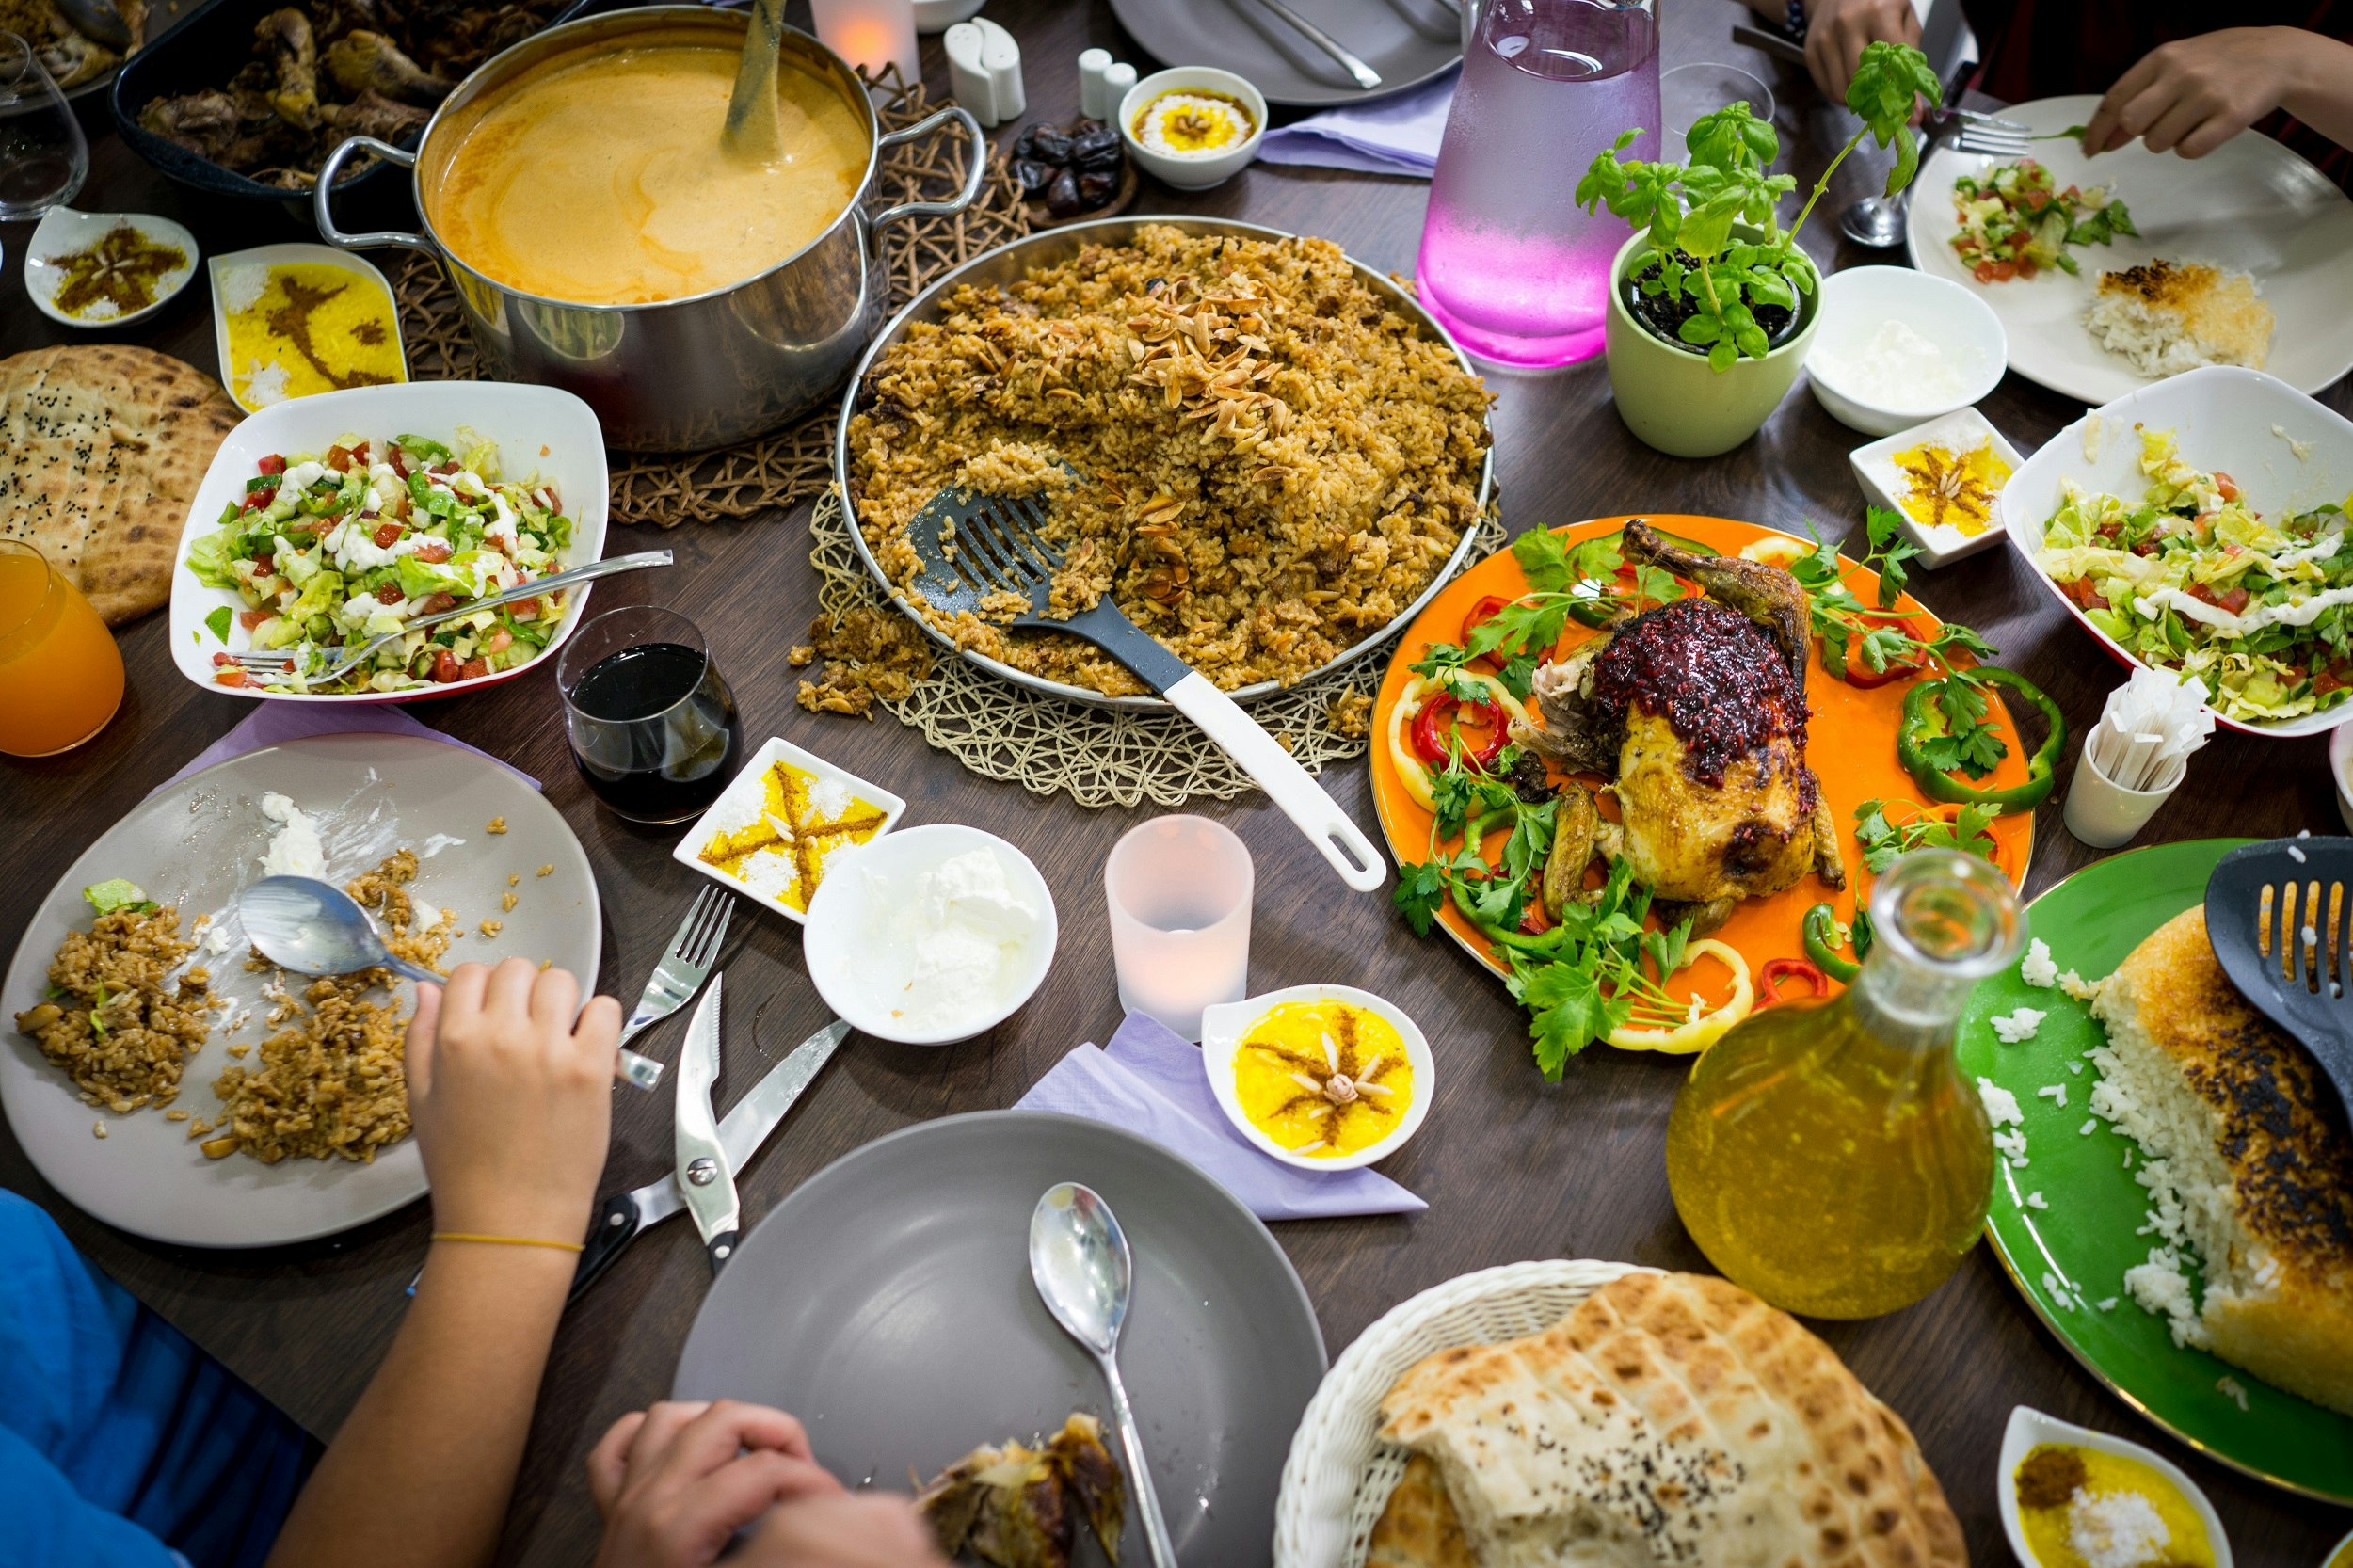 An aerial view of a table covered with different dishes, including rice, a curry dish, roasted chicken and a salad